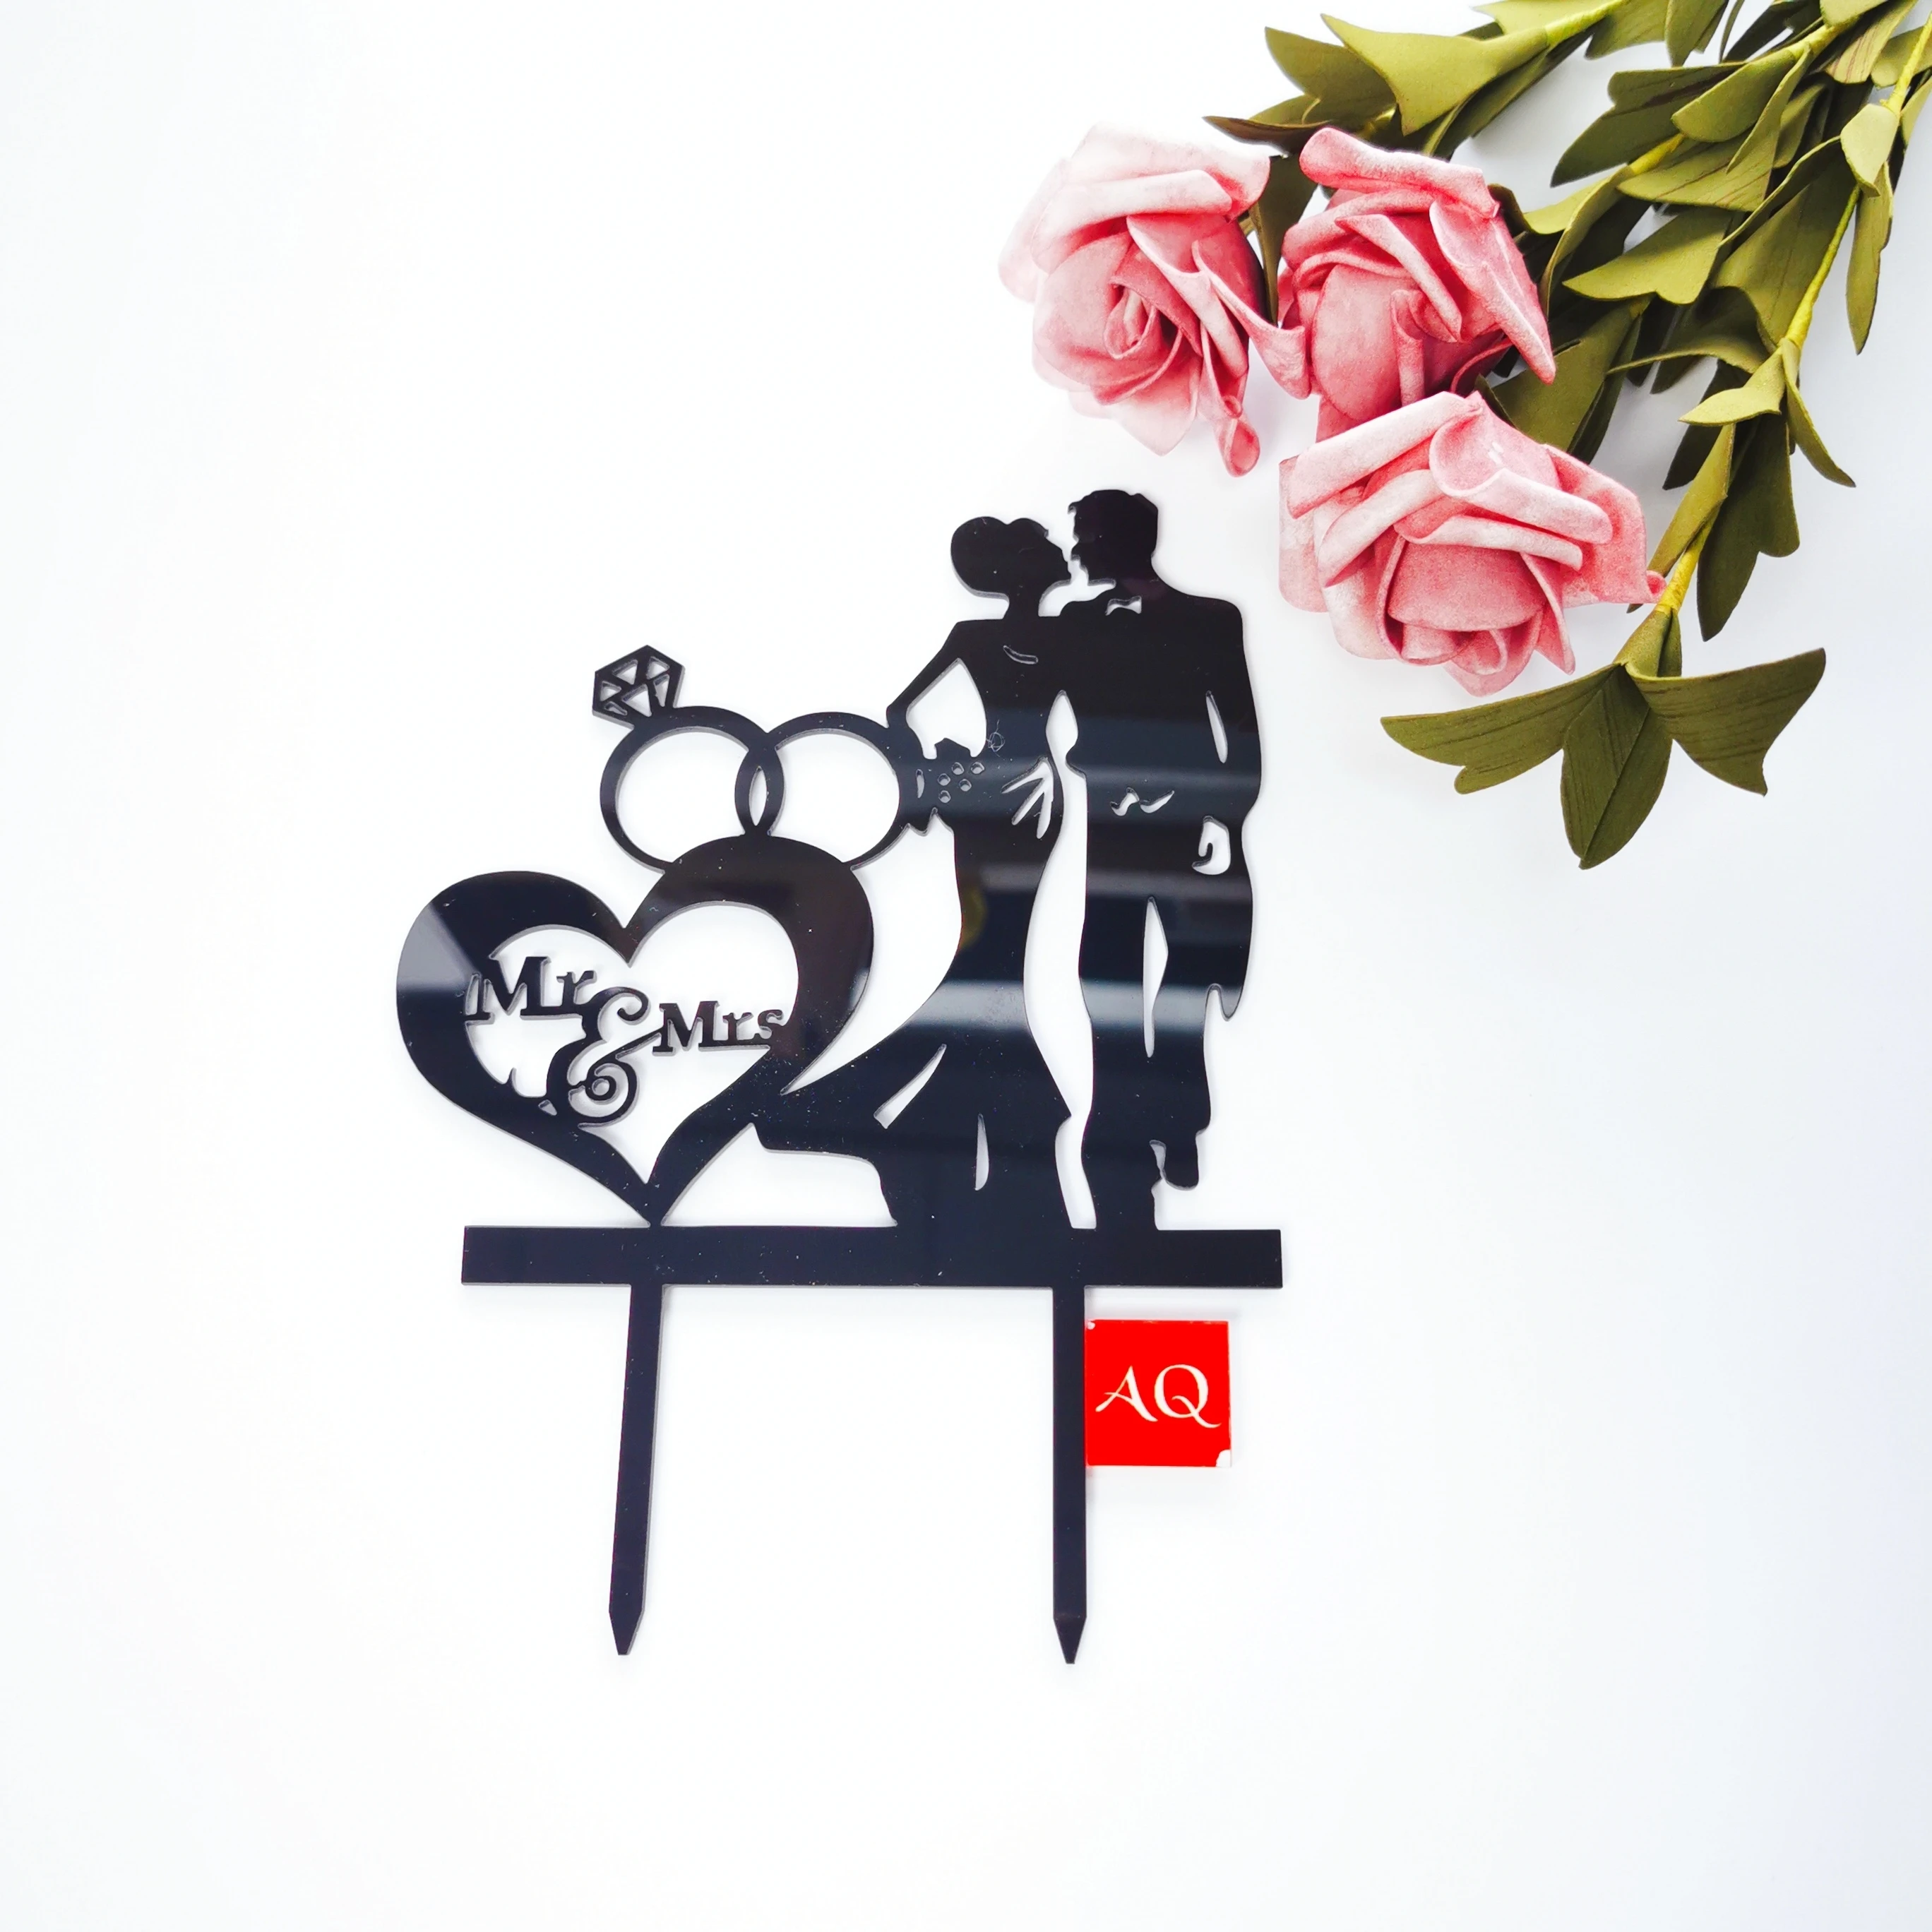 

Mr & Mrs Kiss Love Wedding Anniversary Acrylic Cake Topper for Wedding decoration party supplier